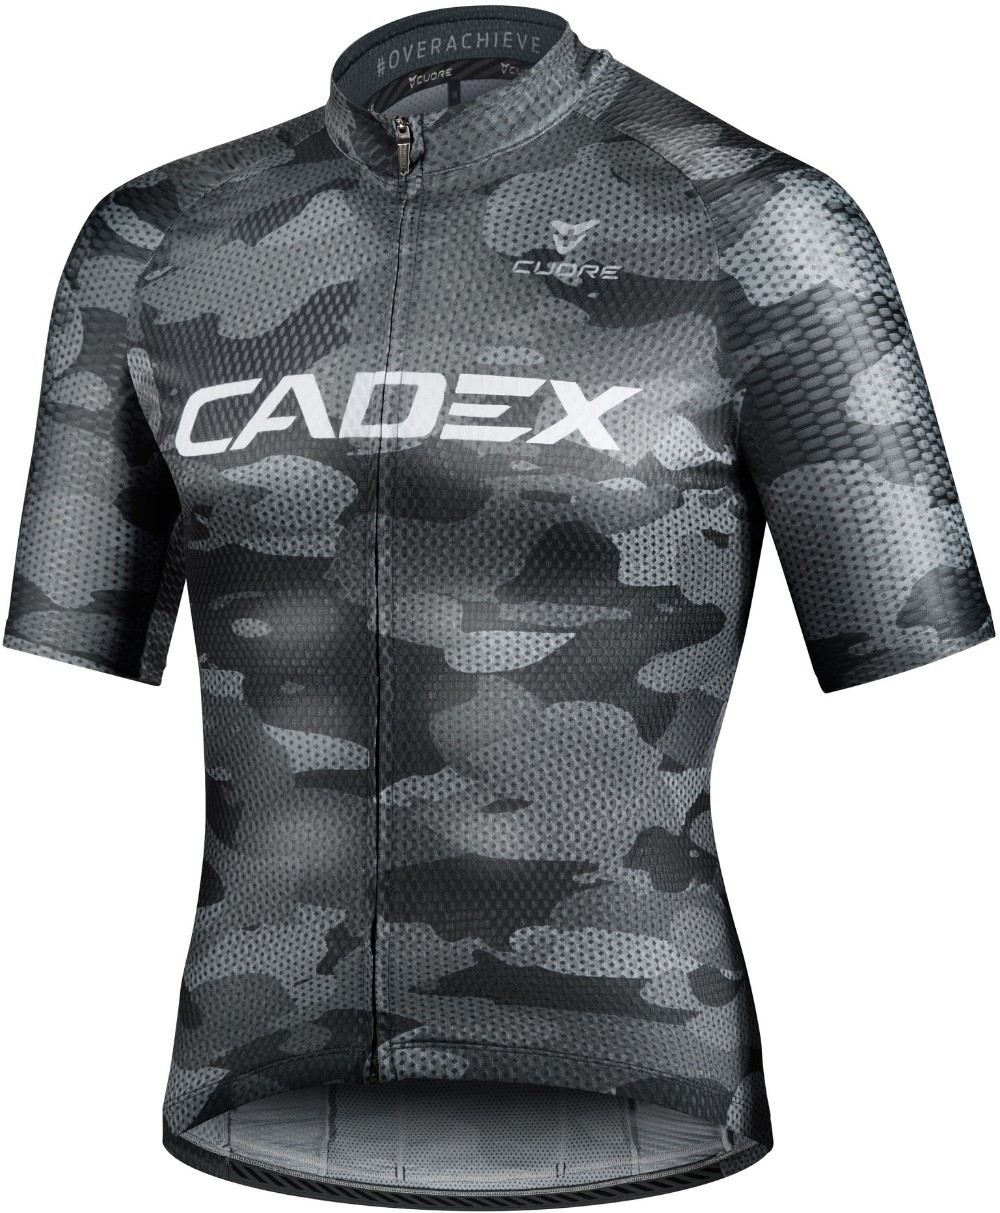 Silver Short Sleeve Jersey image 0